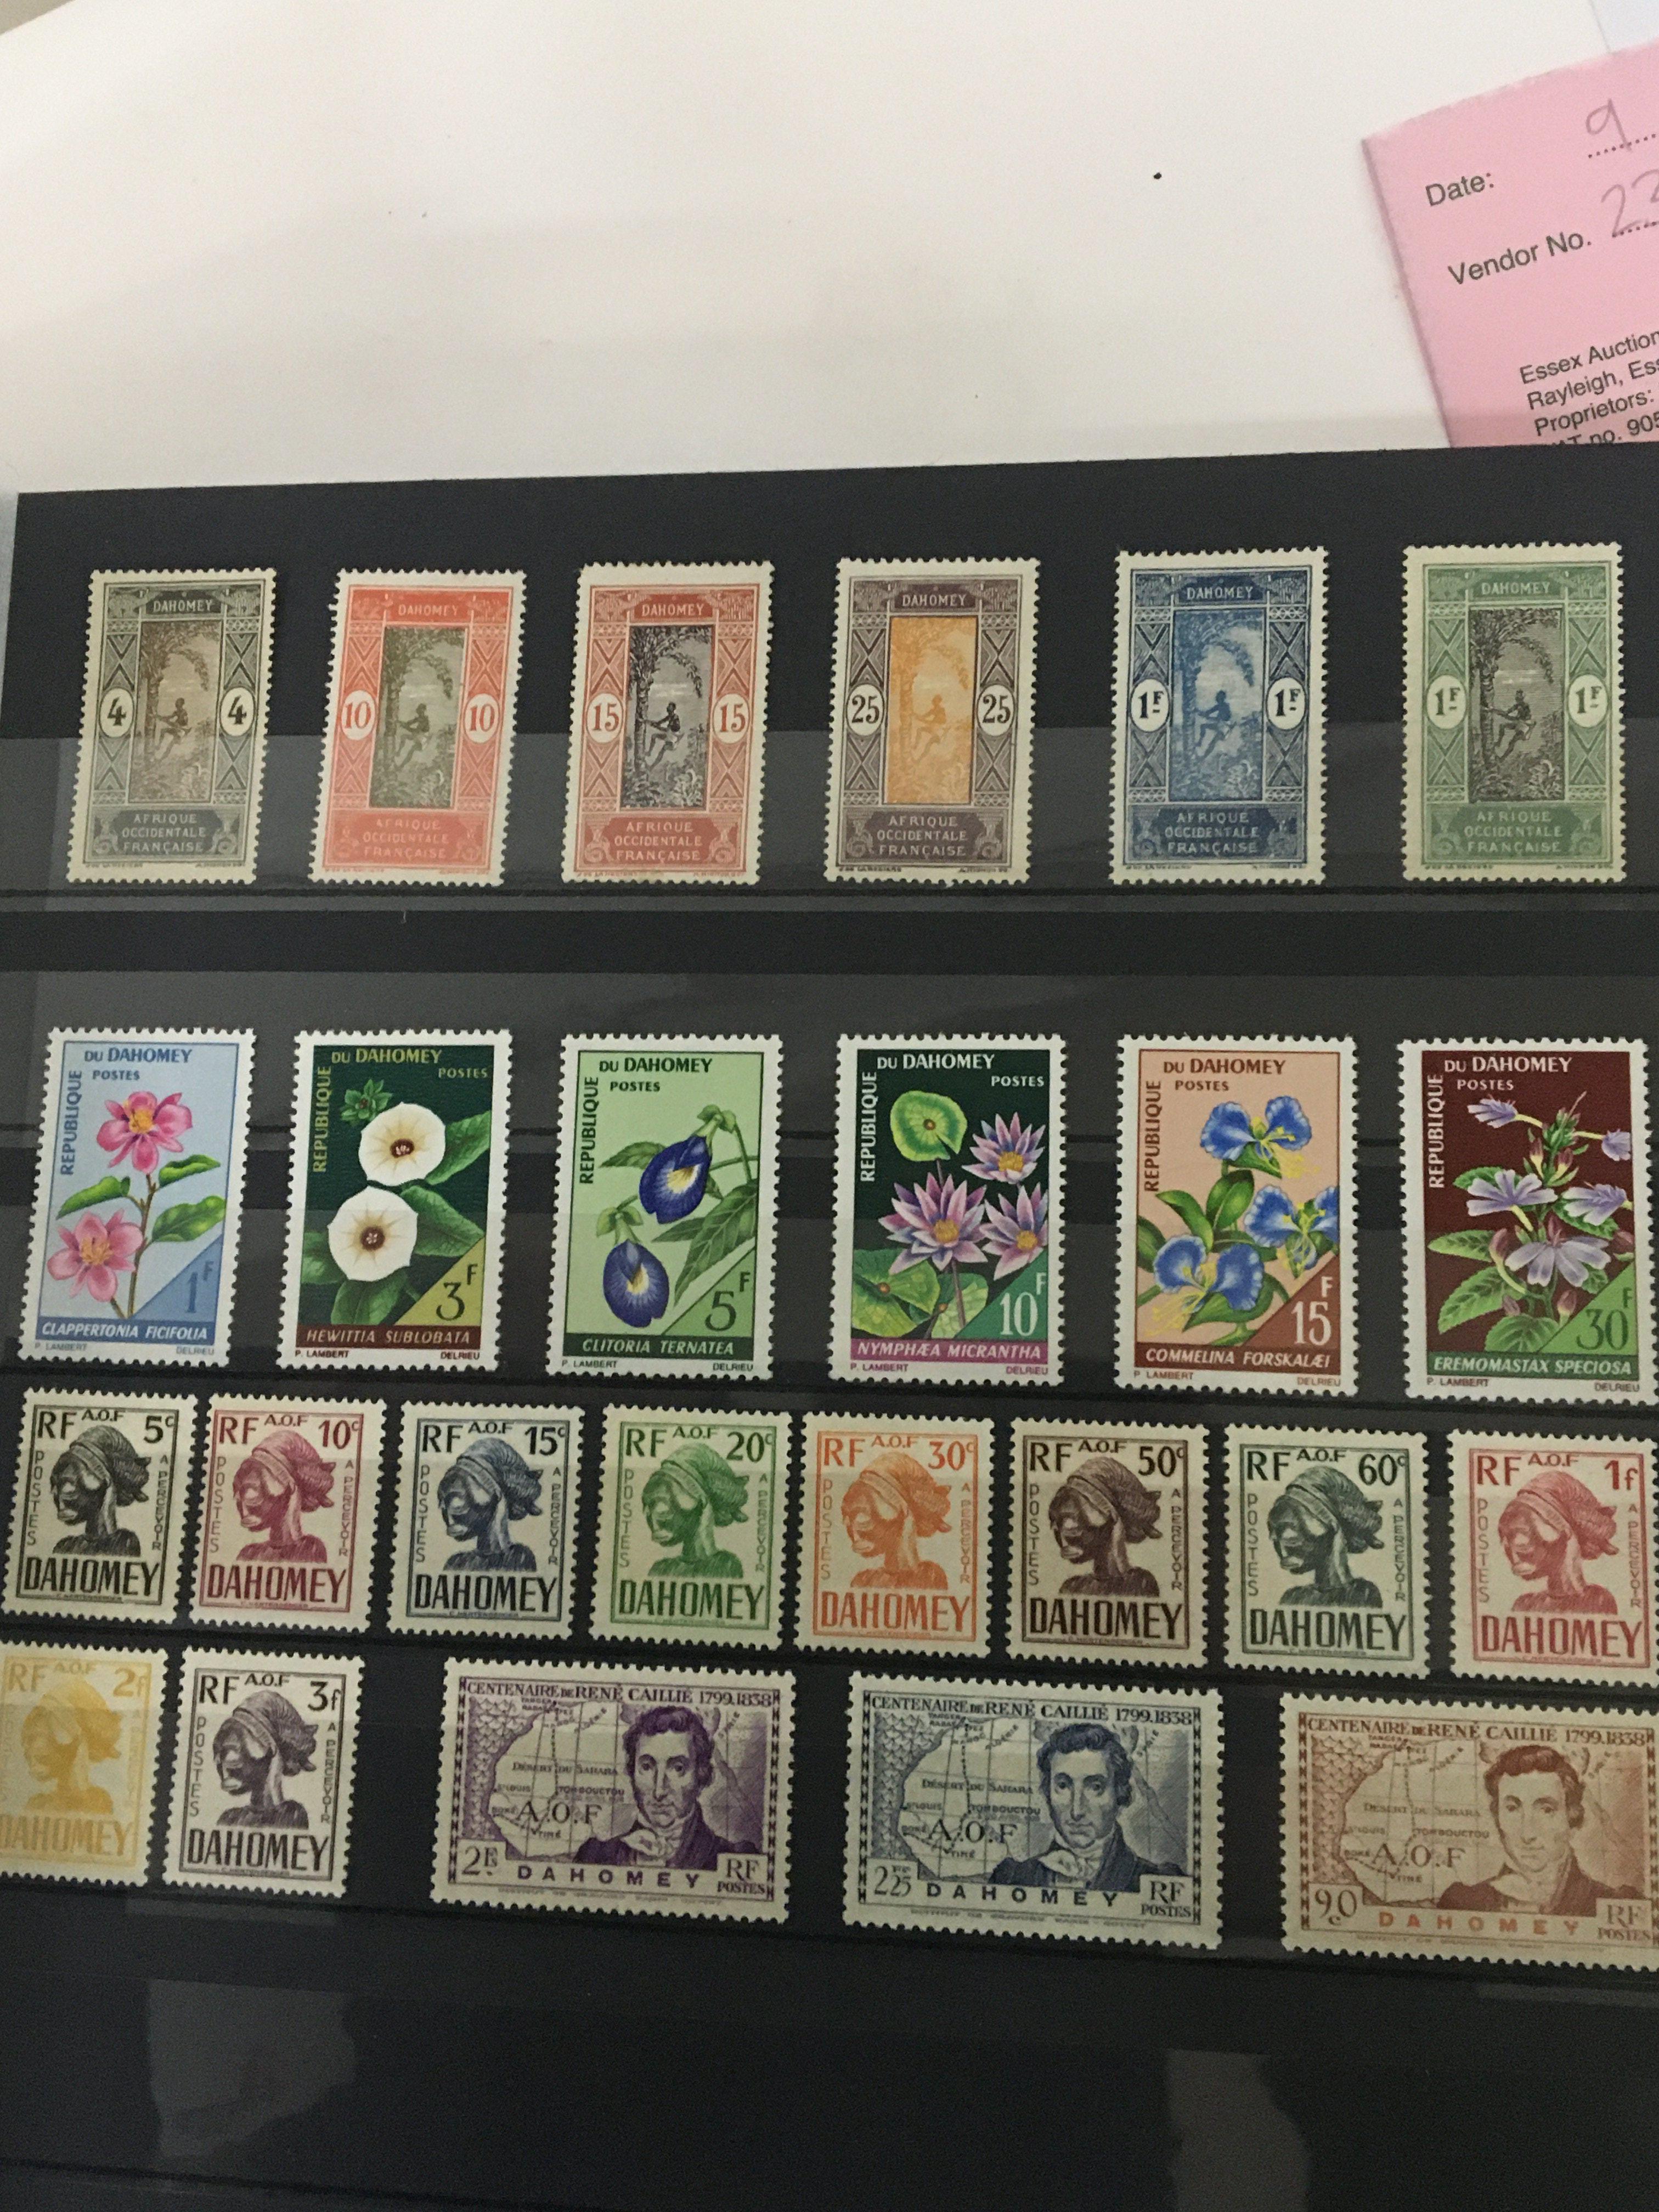 An Album of unused mint stamps well presented Stam - Image 3 of 7